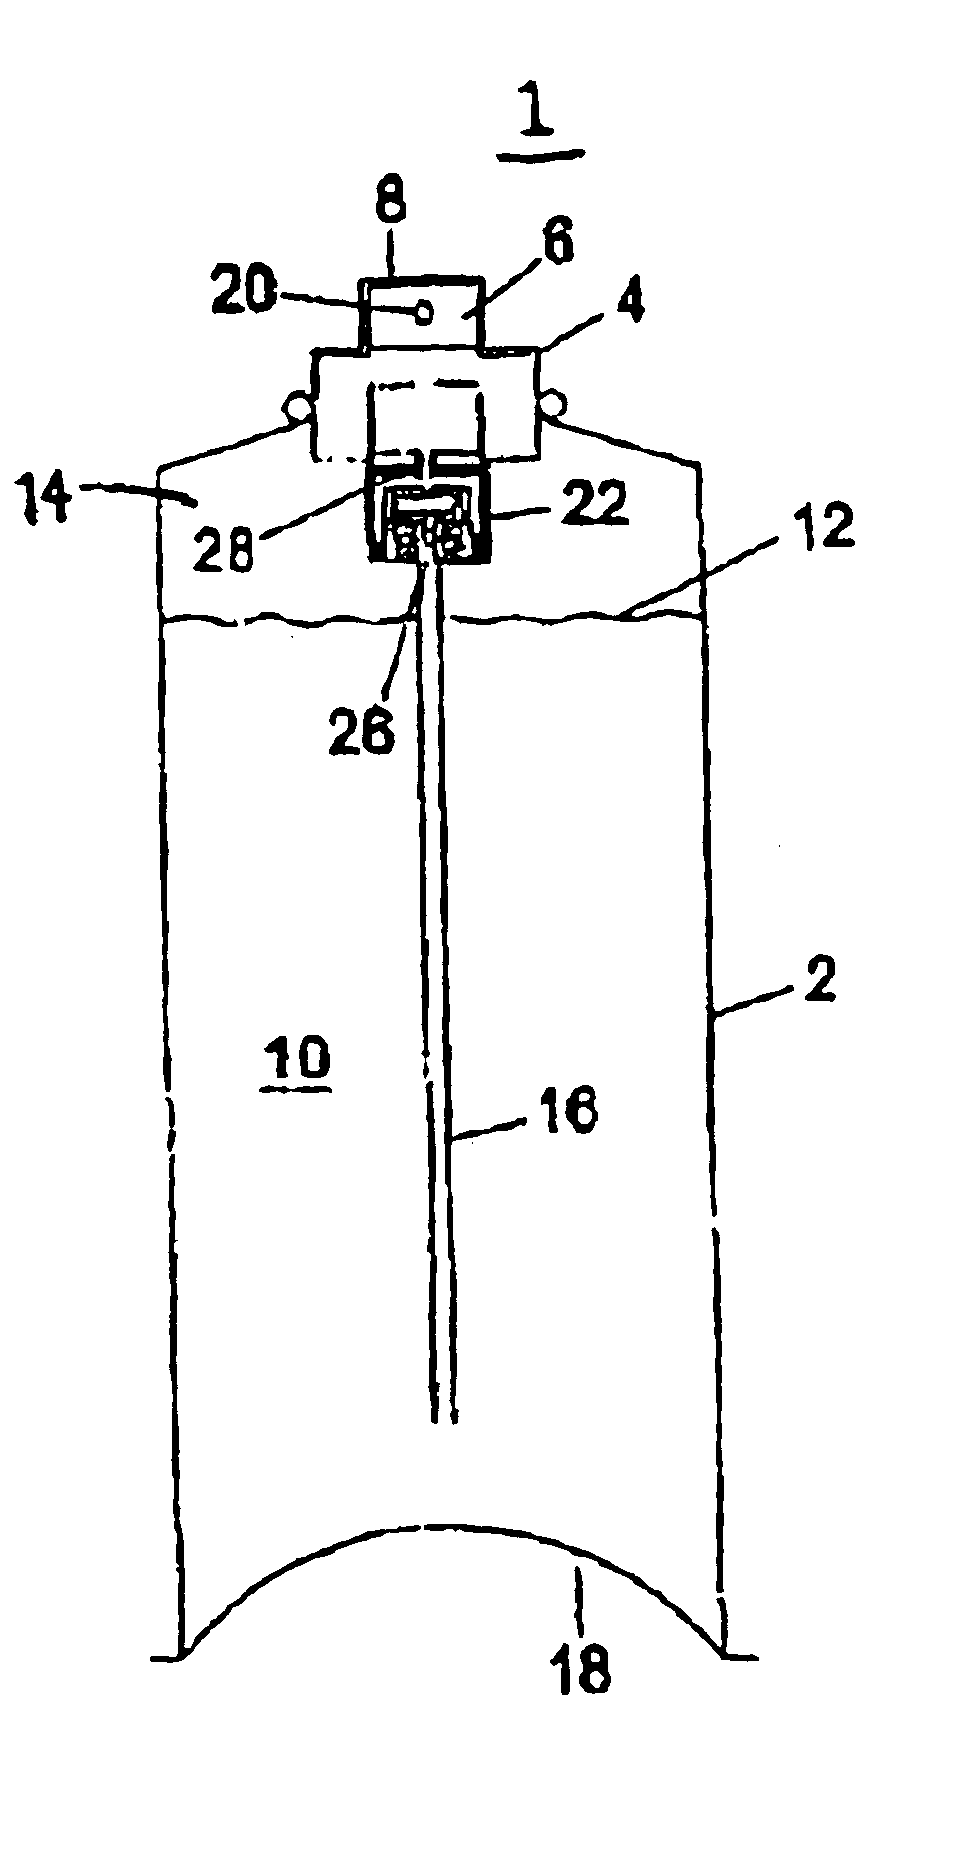 Pressurized package comprising a pressure control device